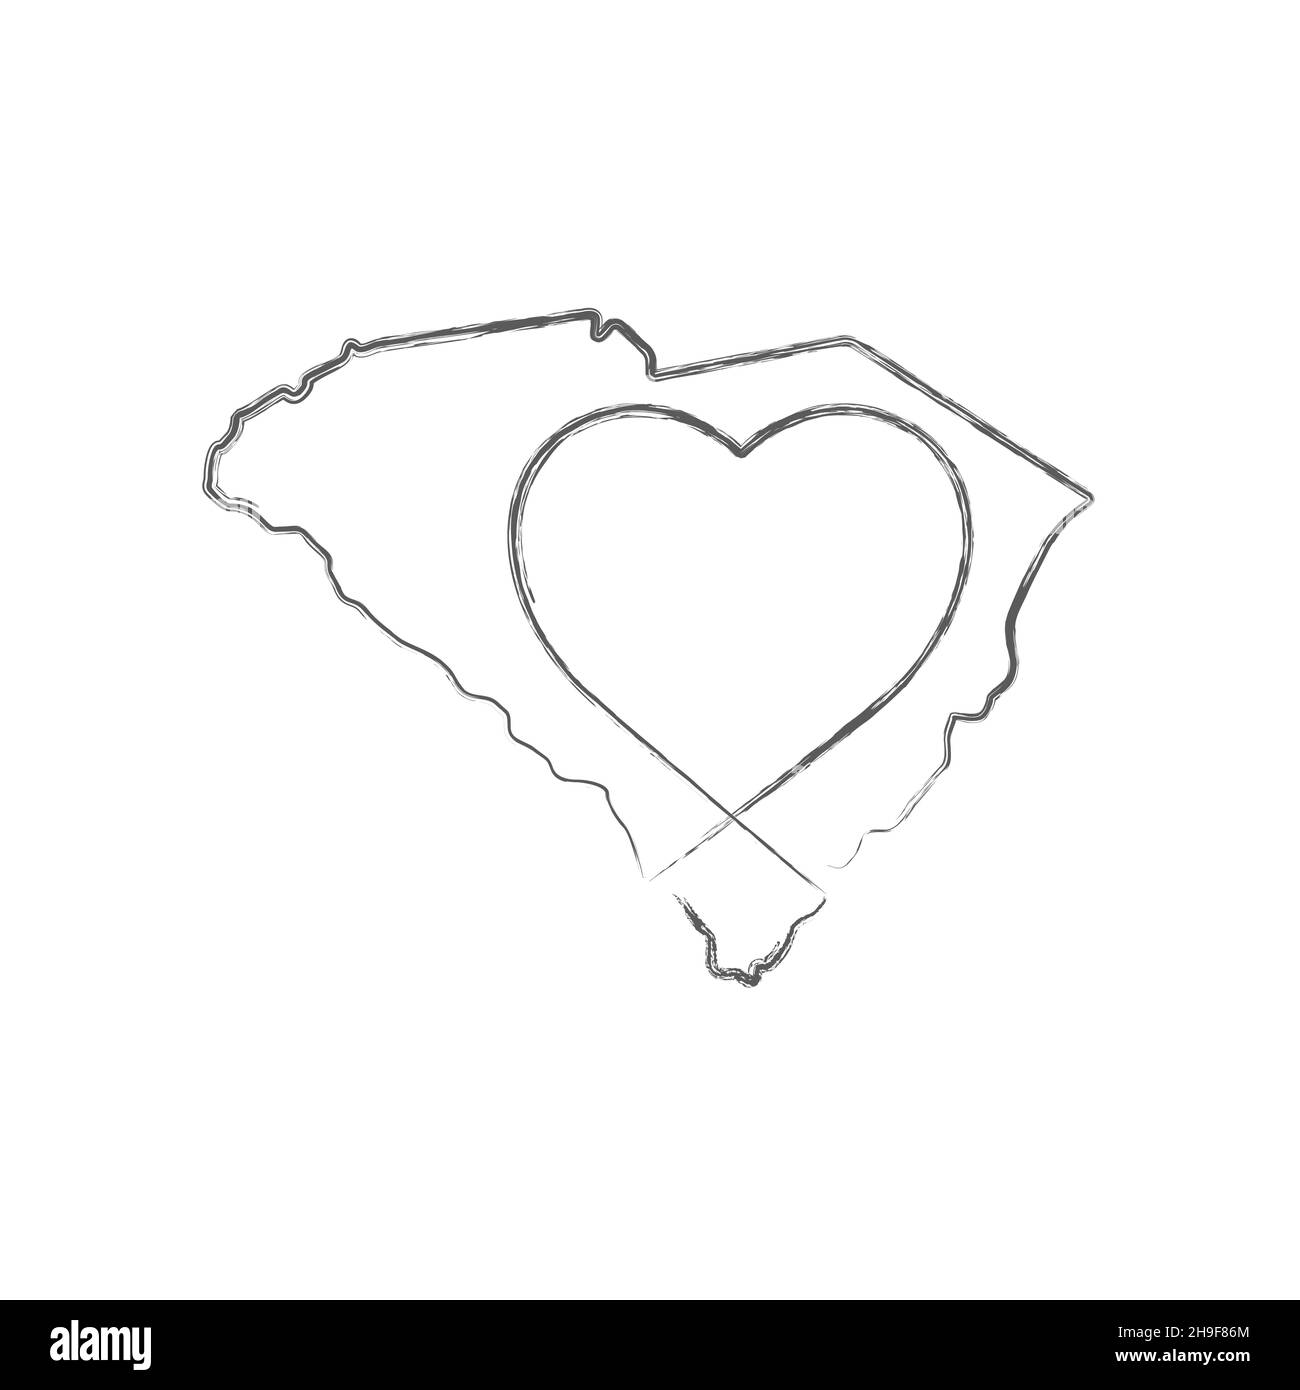 South Carolina Us State Hand Drawn Pencil Sketch Outline Map With Heart